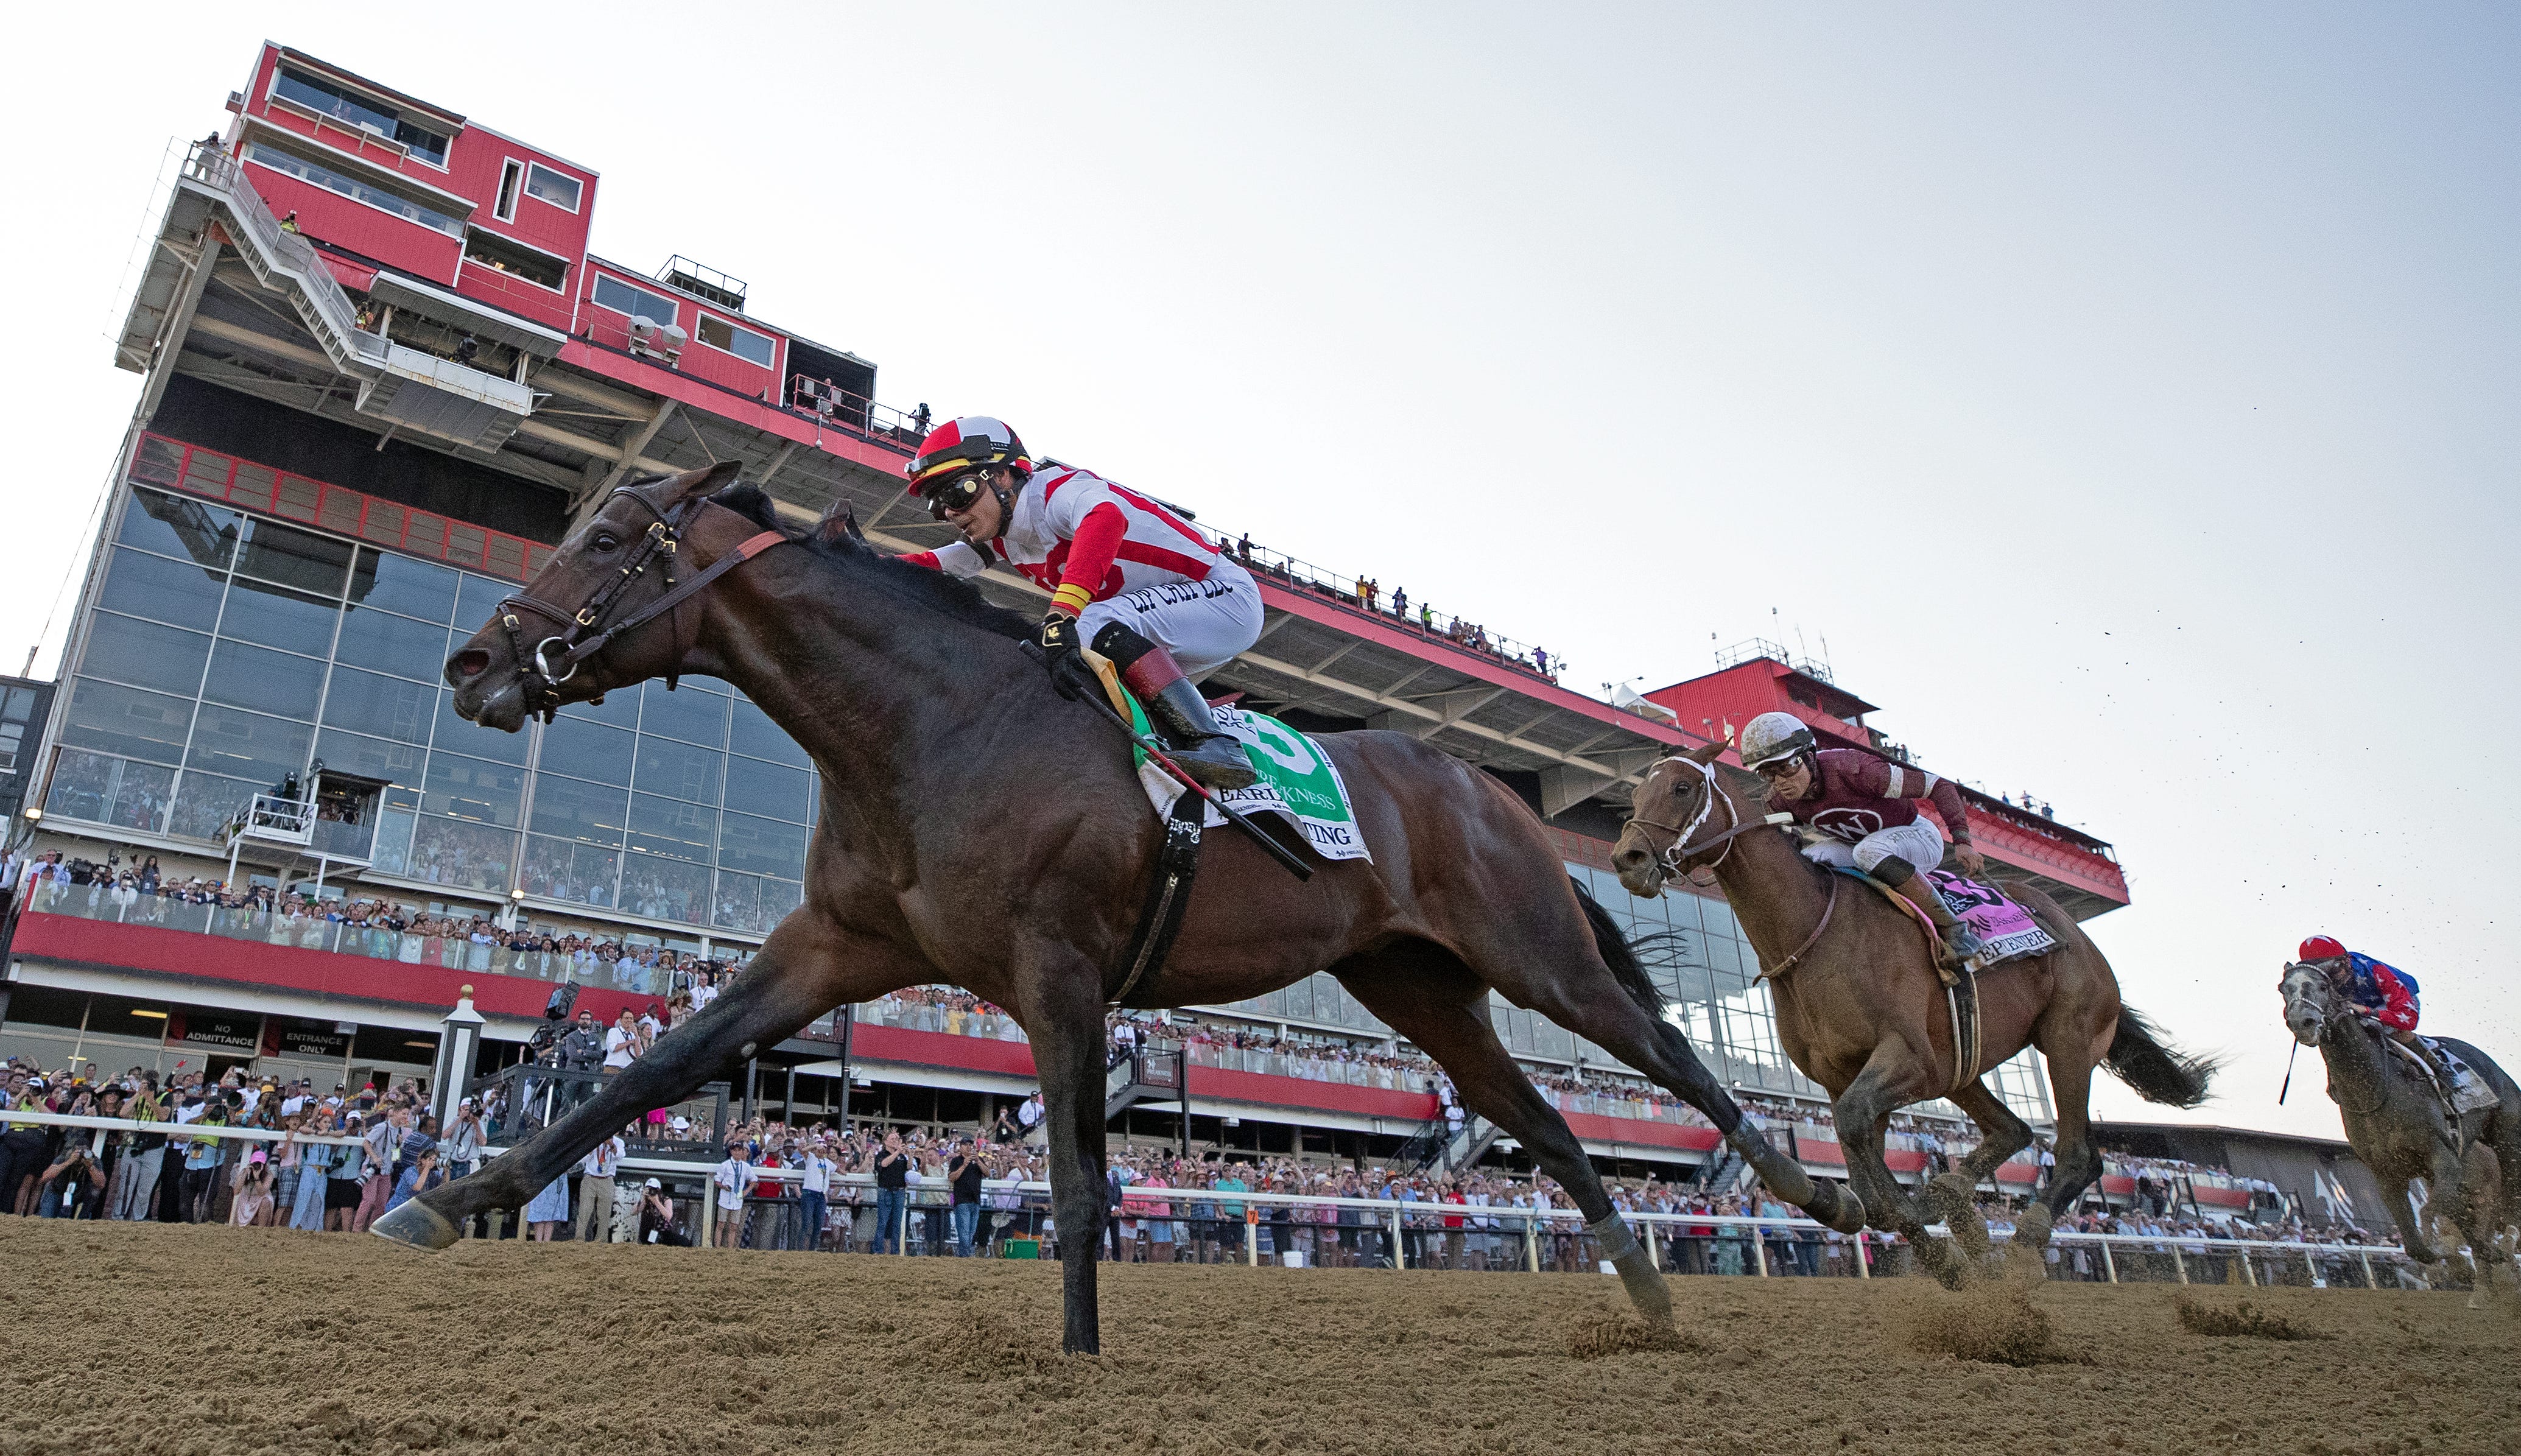 A fresh Early Voting holds off favored Epicenter to win Preakness